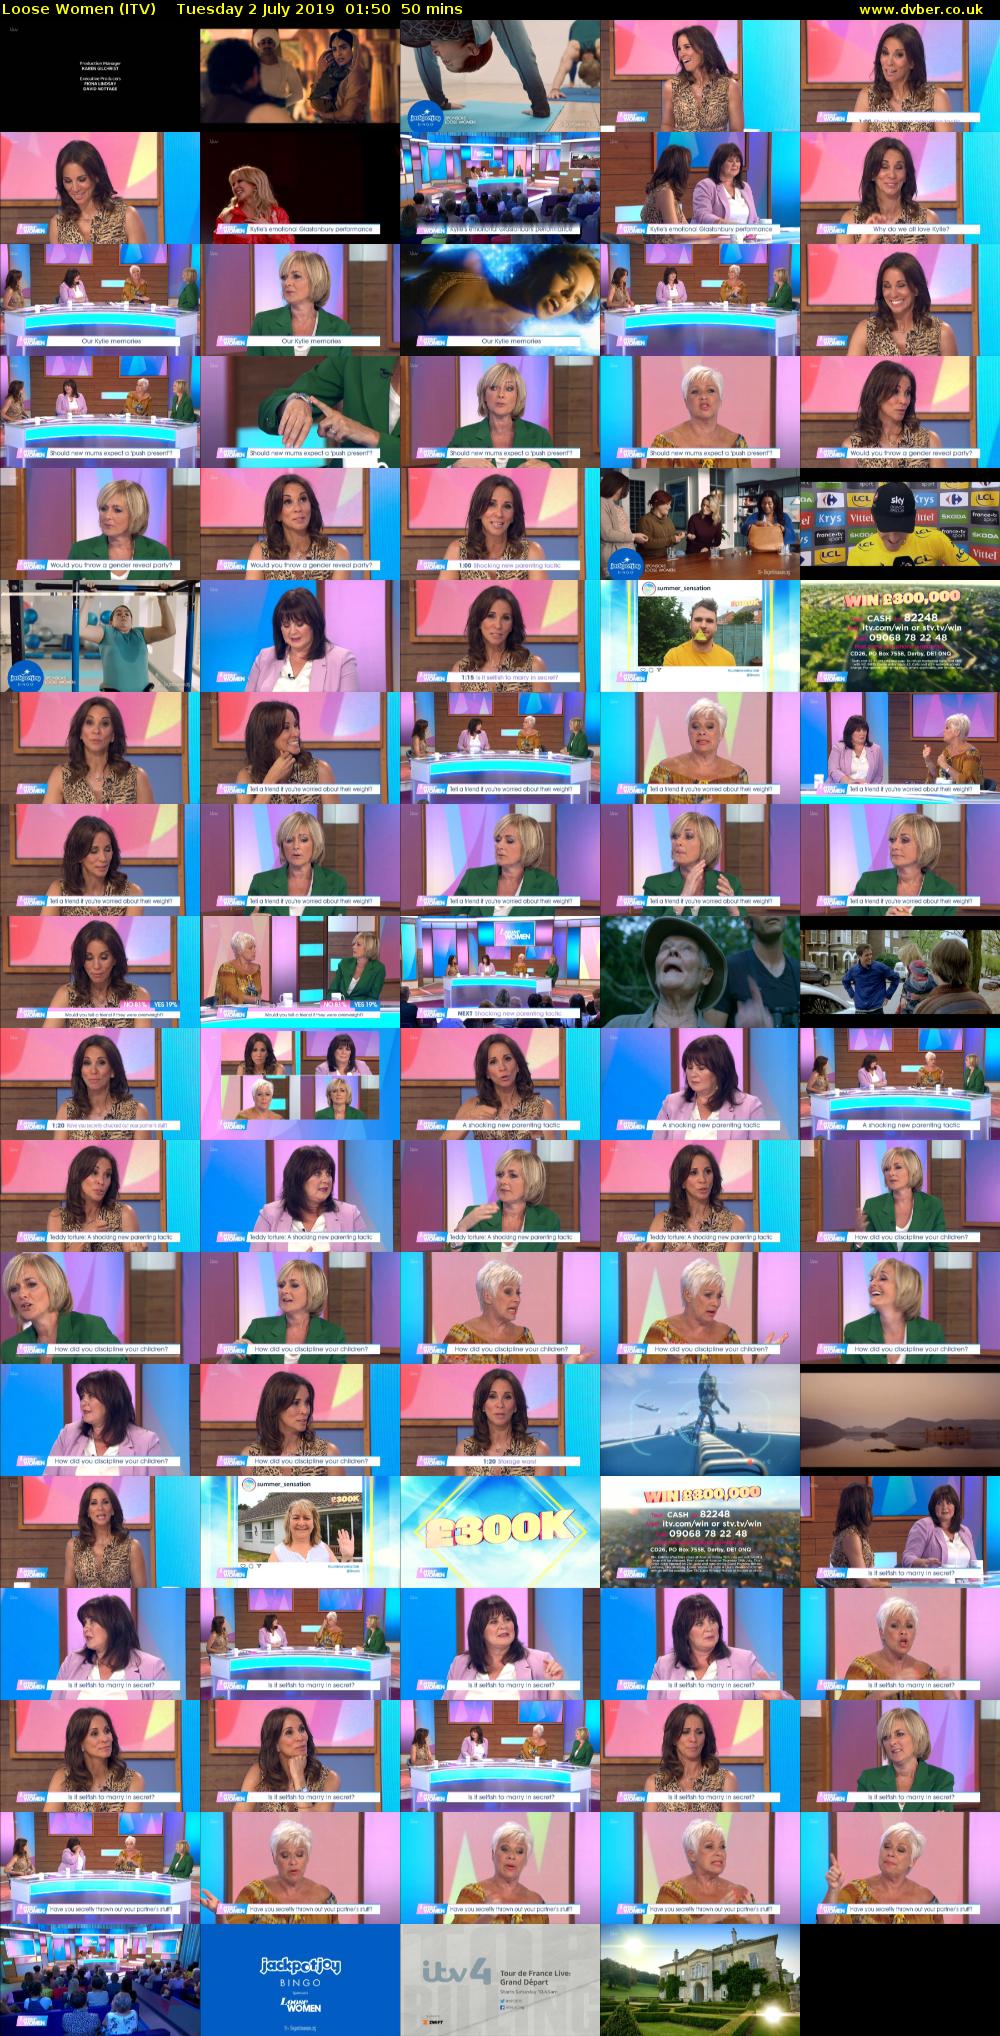 Loose Women (ITV) Tuesday 2 July 2019 01:50 - 02:40